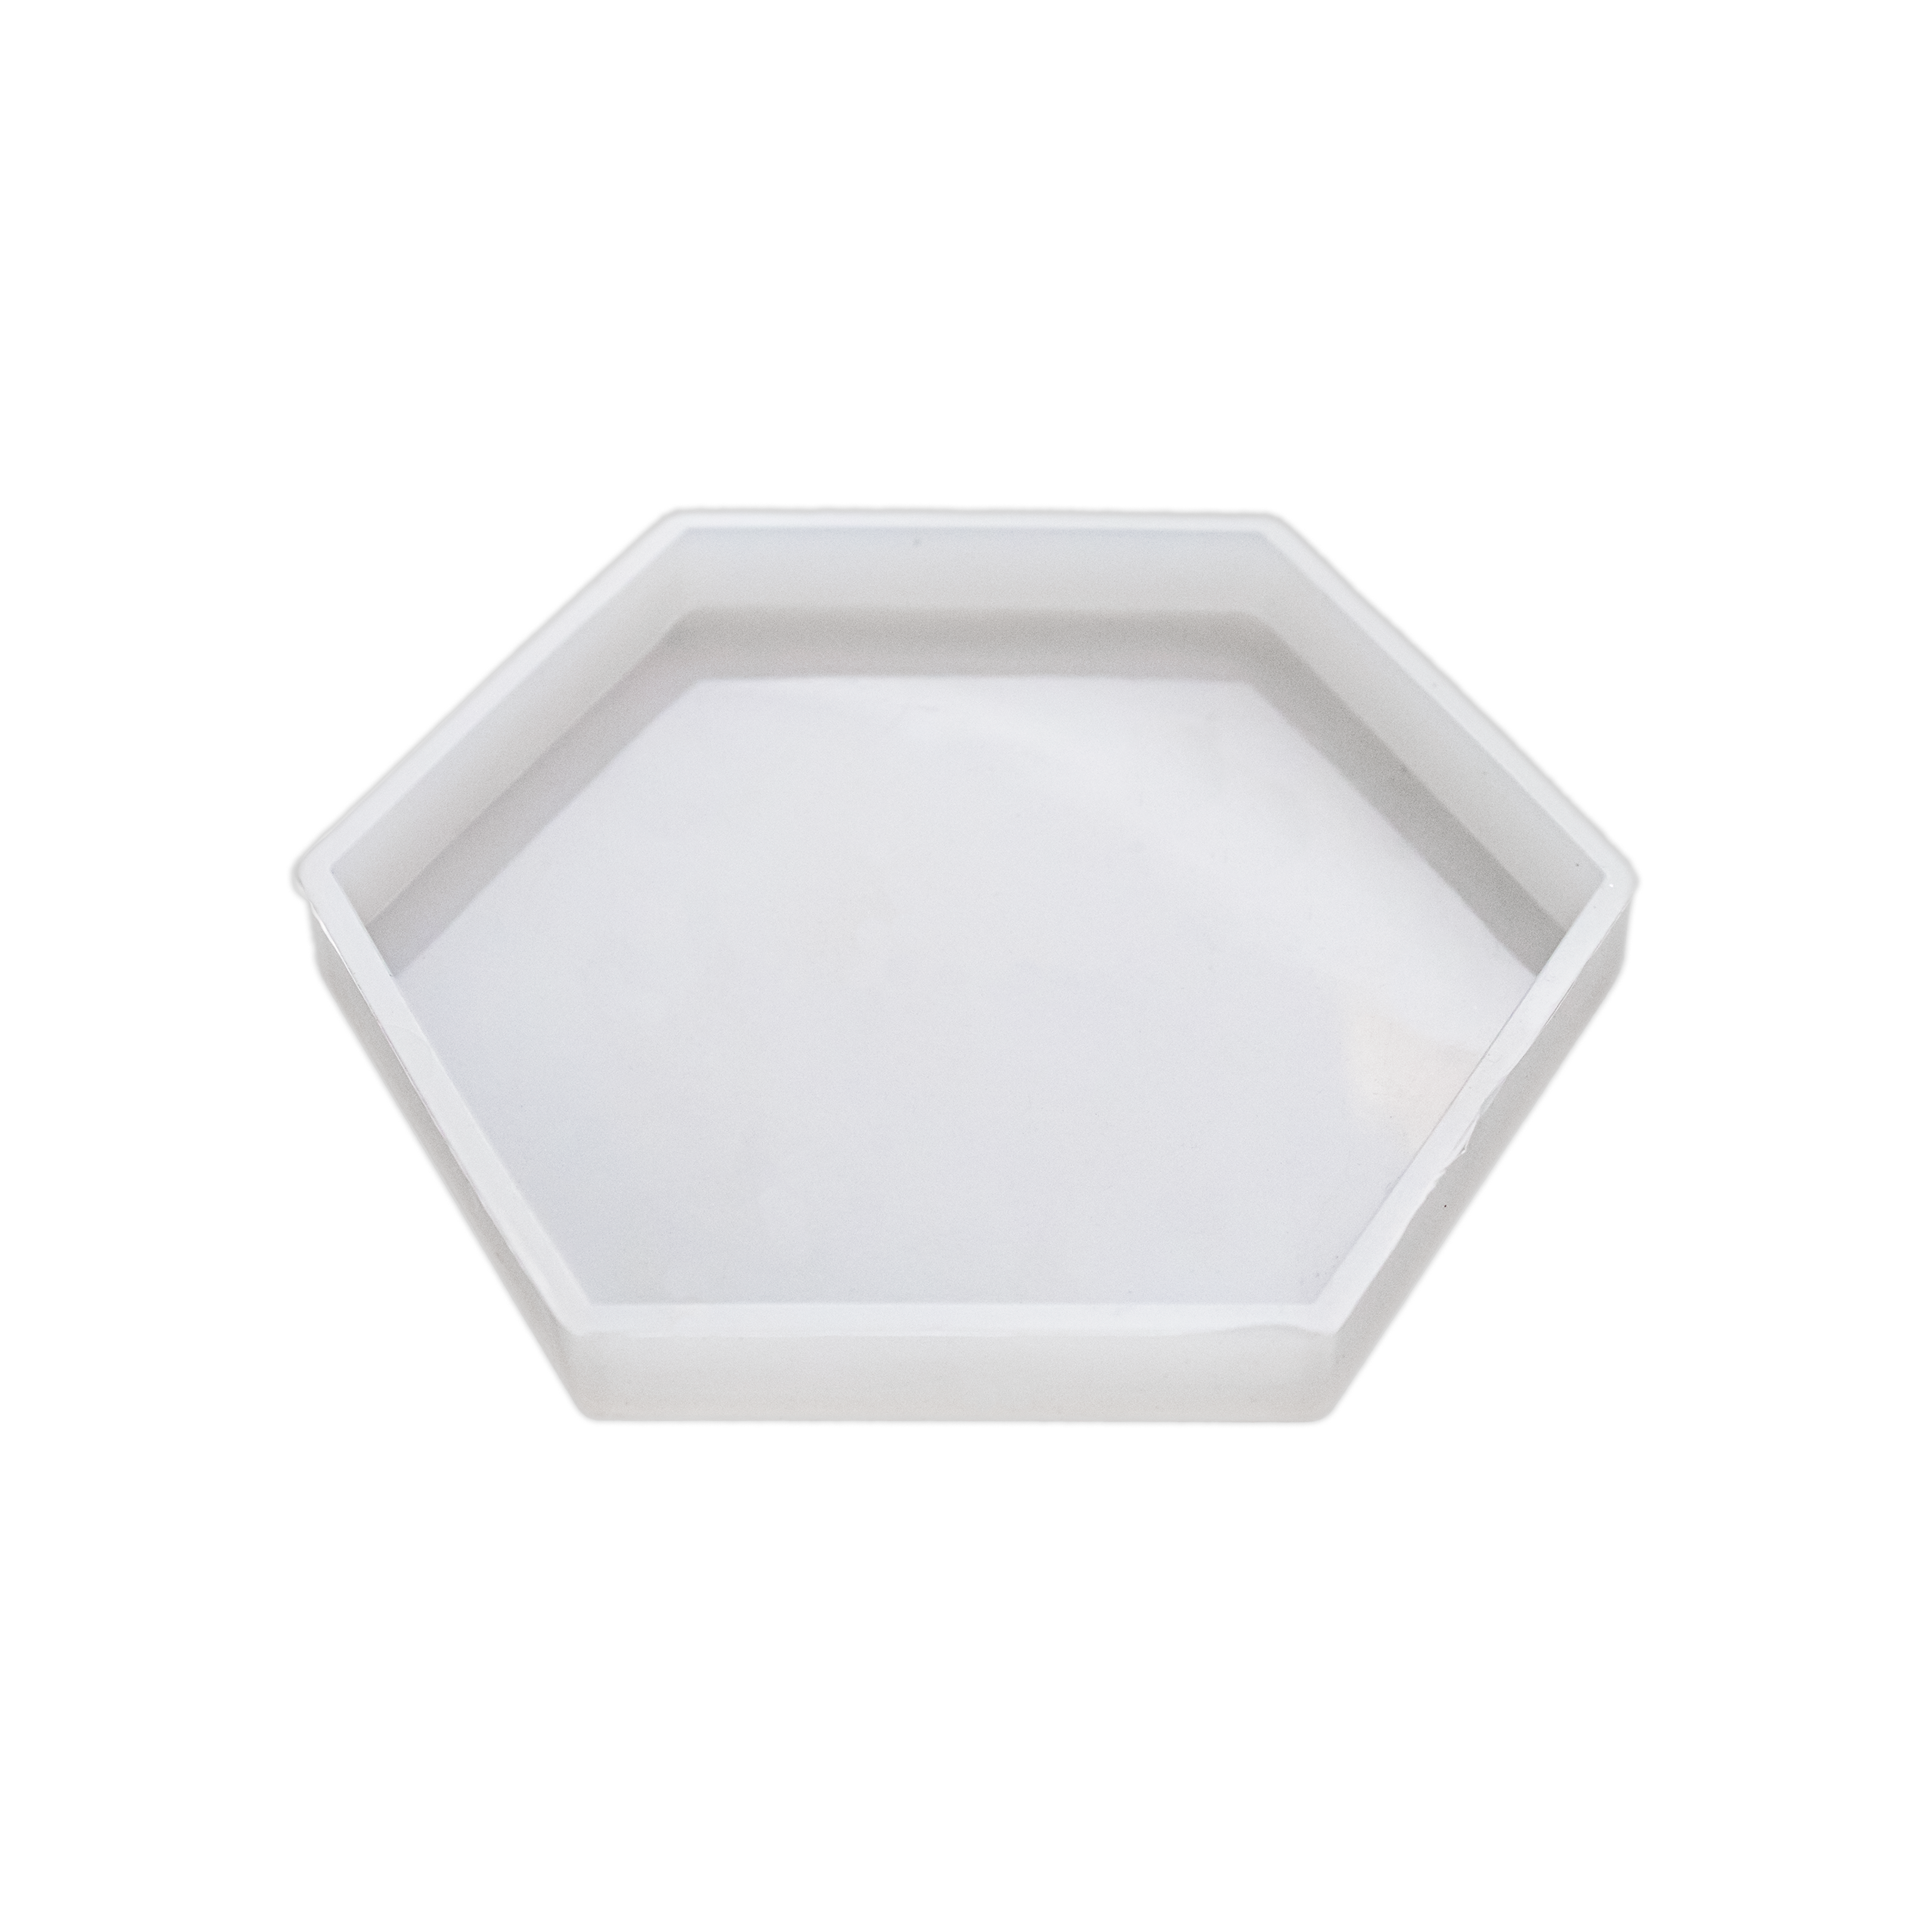 Silicone Mould Hexagonal Coaster L4.75 X W4inch Approx 1pc